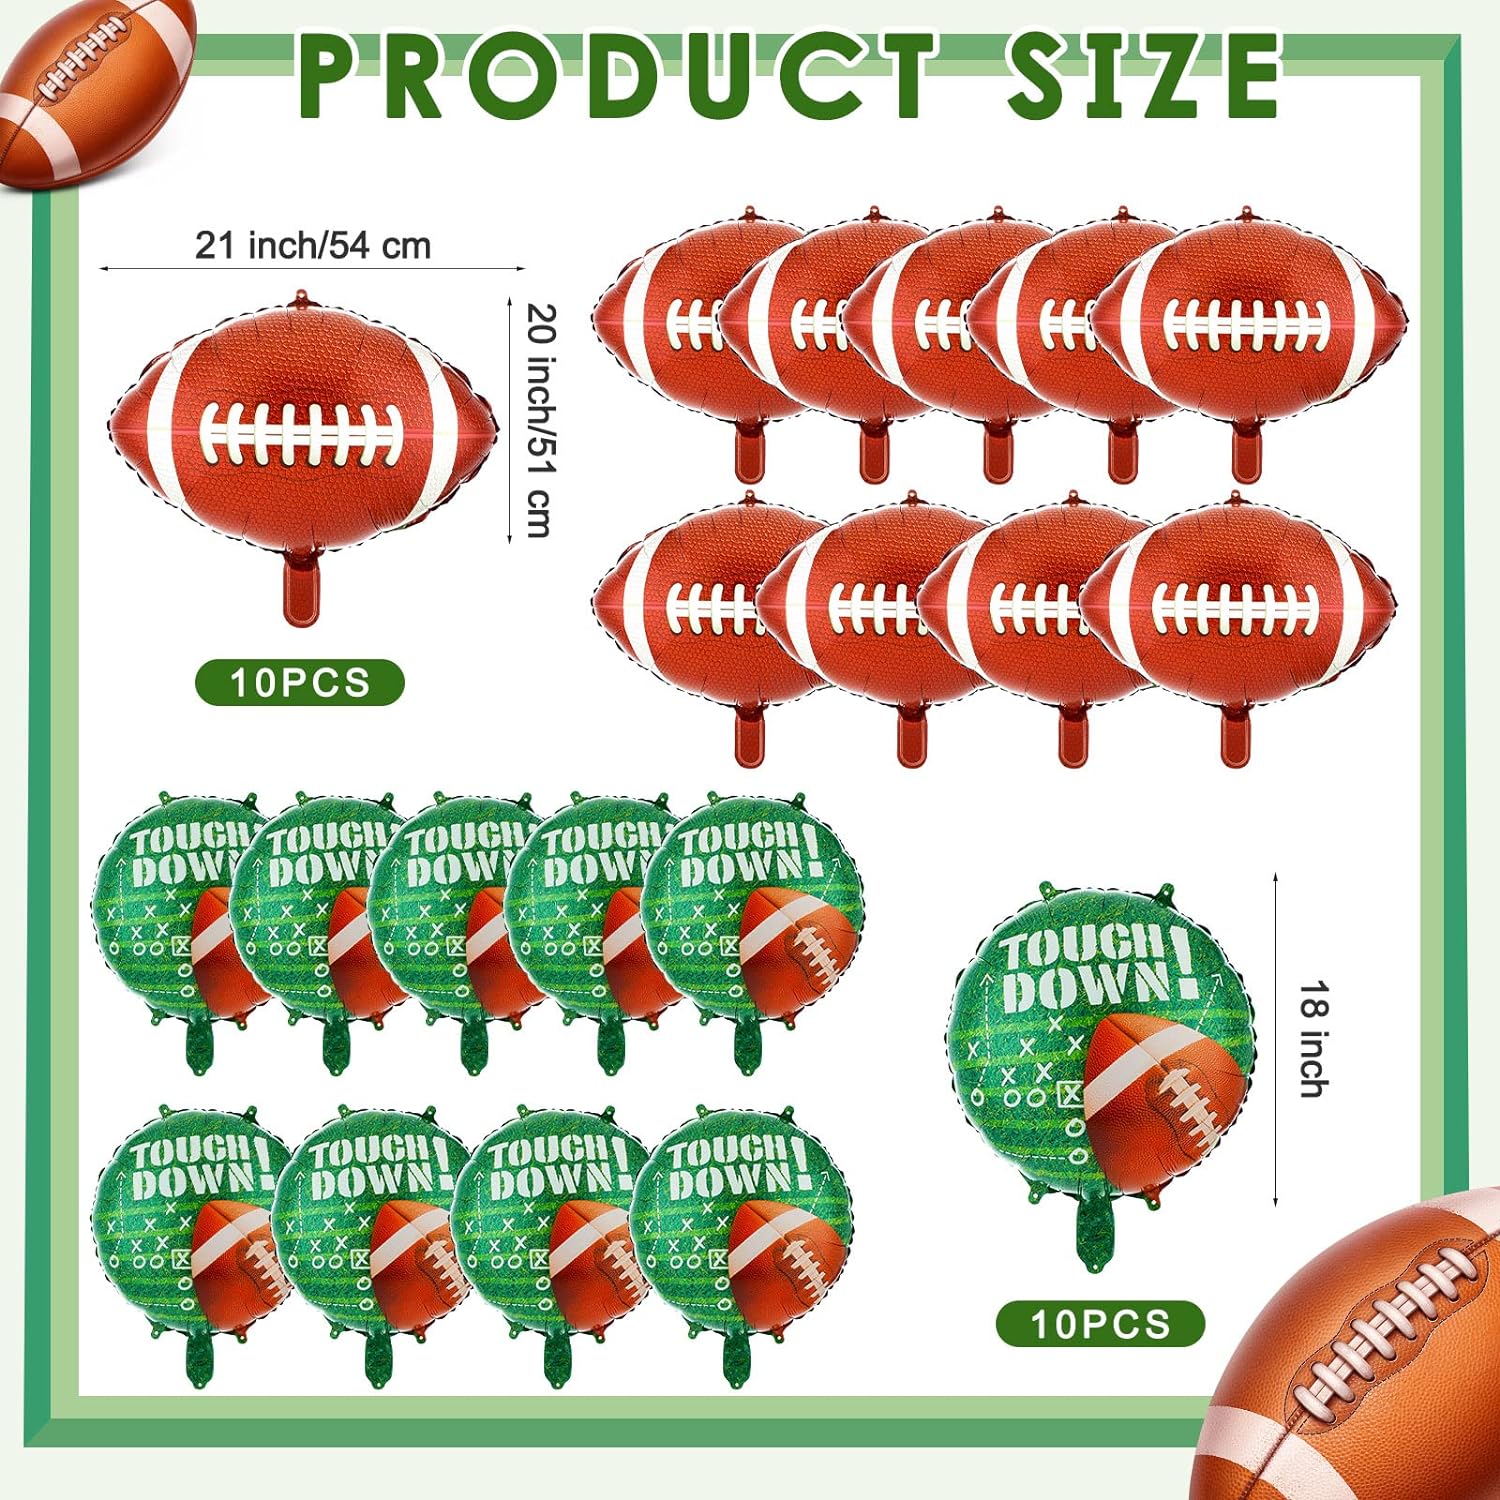 thinkstar 20 Pieces Football Balloons Football Foil Balloons Rugby Balloons 18 Inch Touch Down Balloons For Tailgate Game Day Spor…